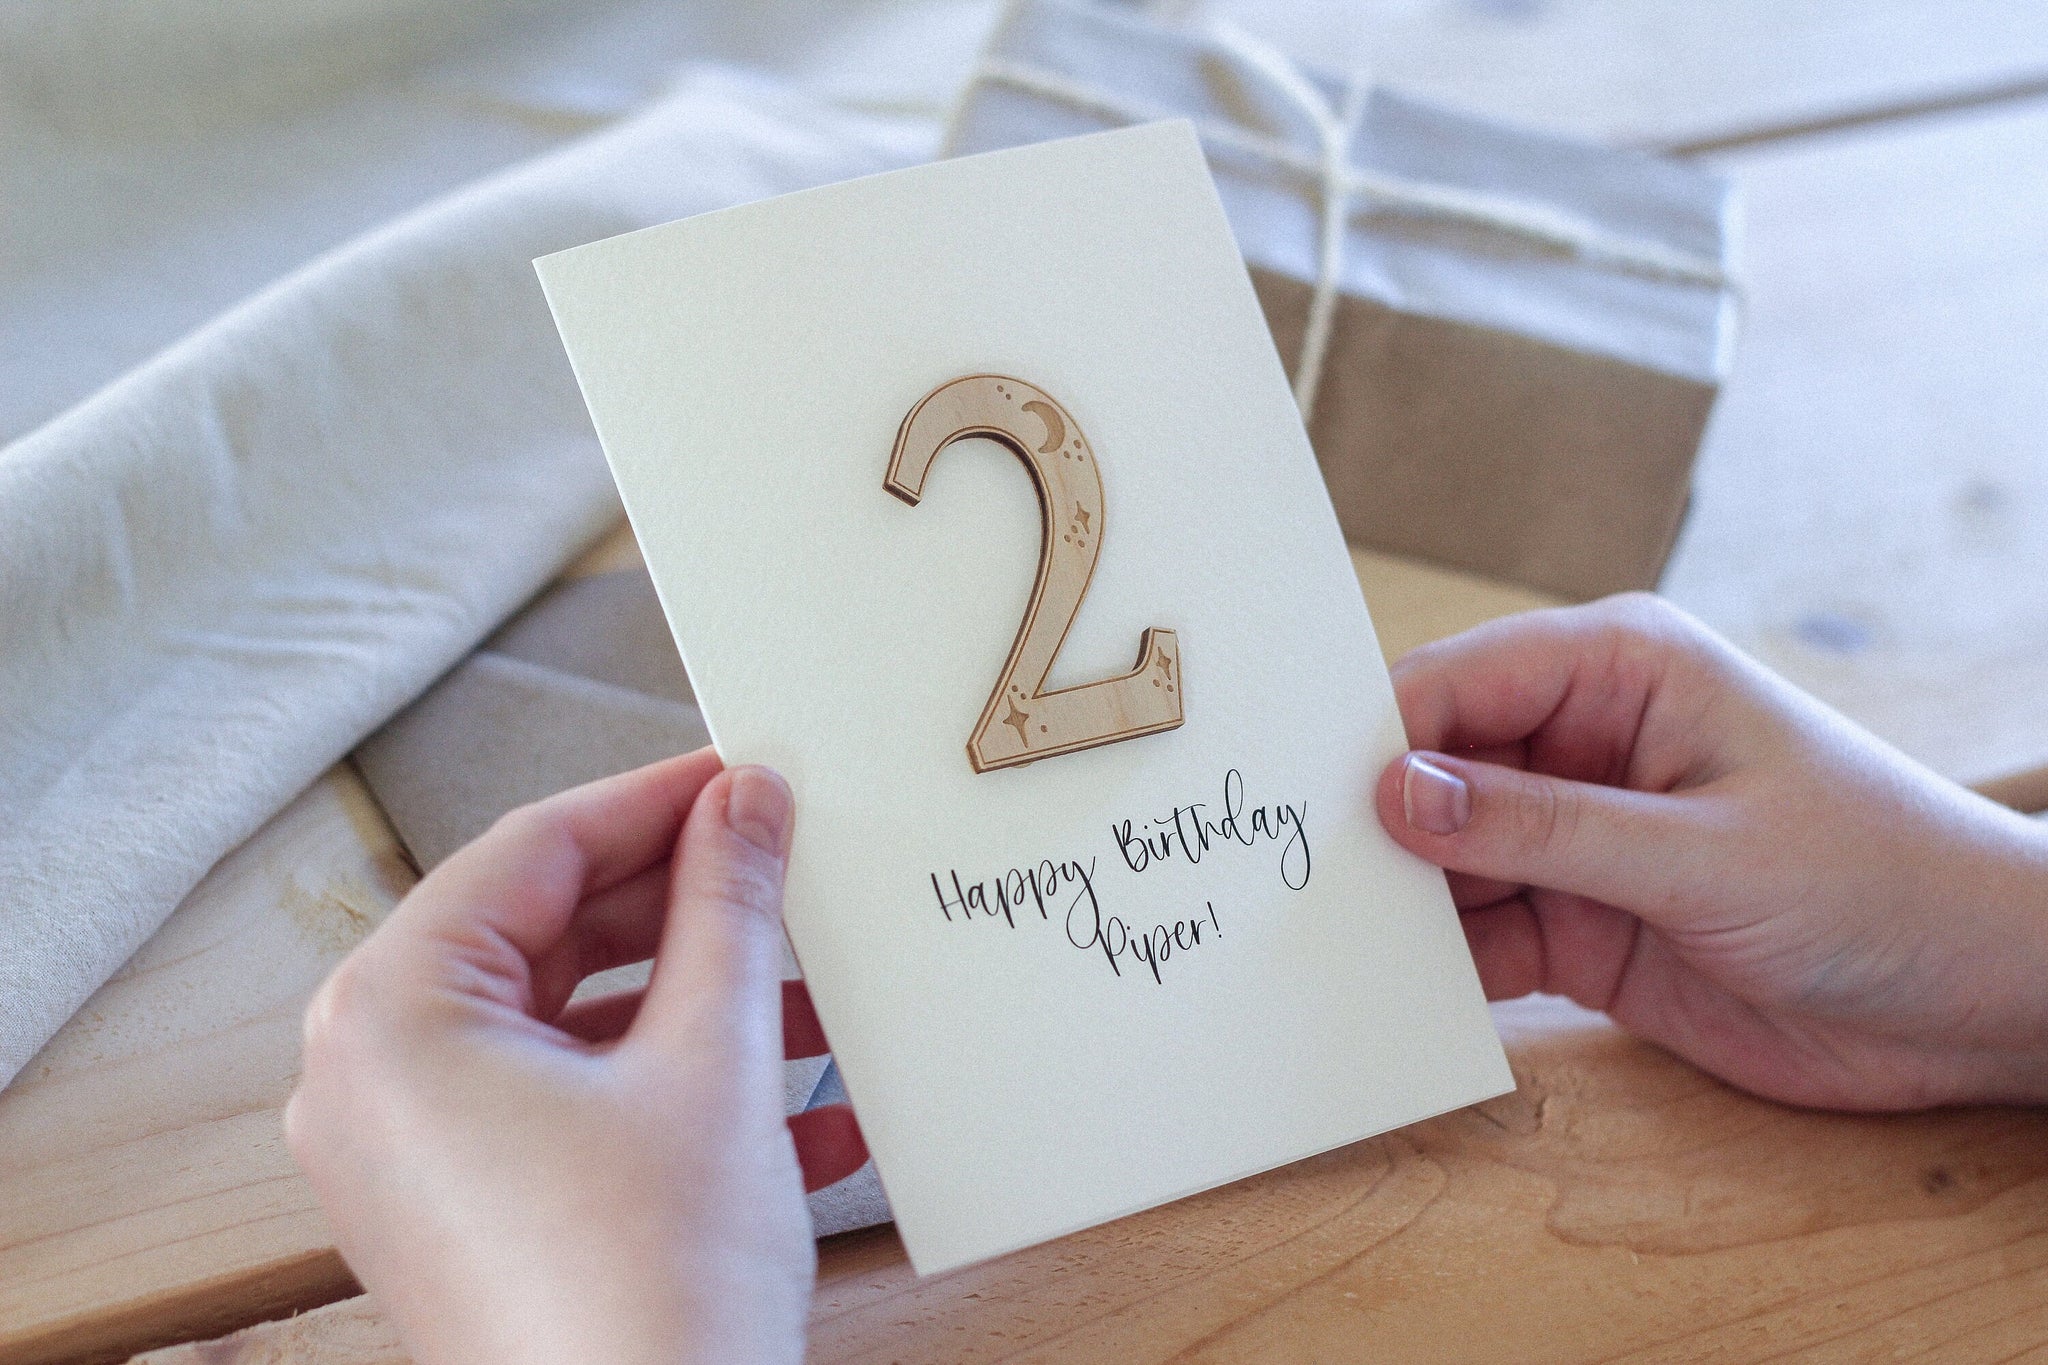 Personalised Number Birthday Card | 2nd Birthday | Celebration Card | Wooden Card